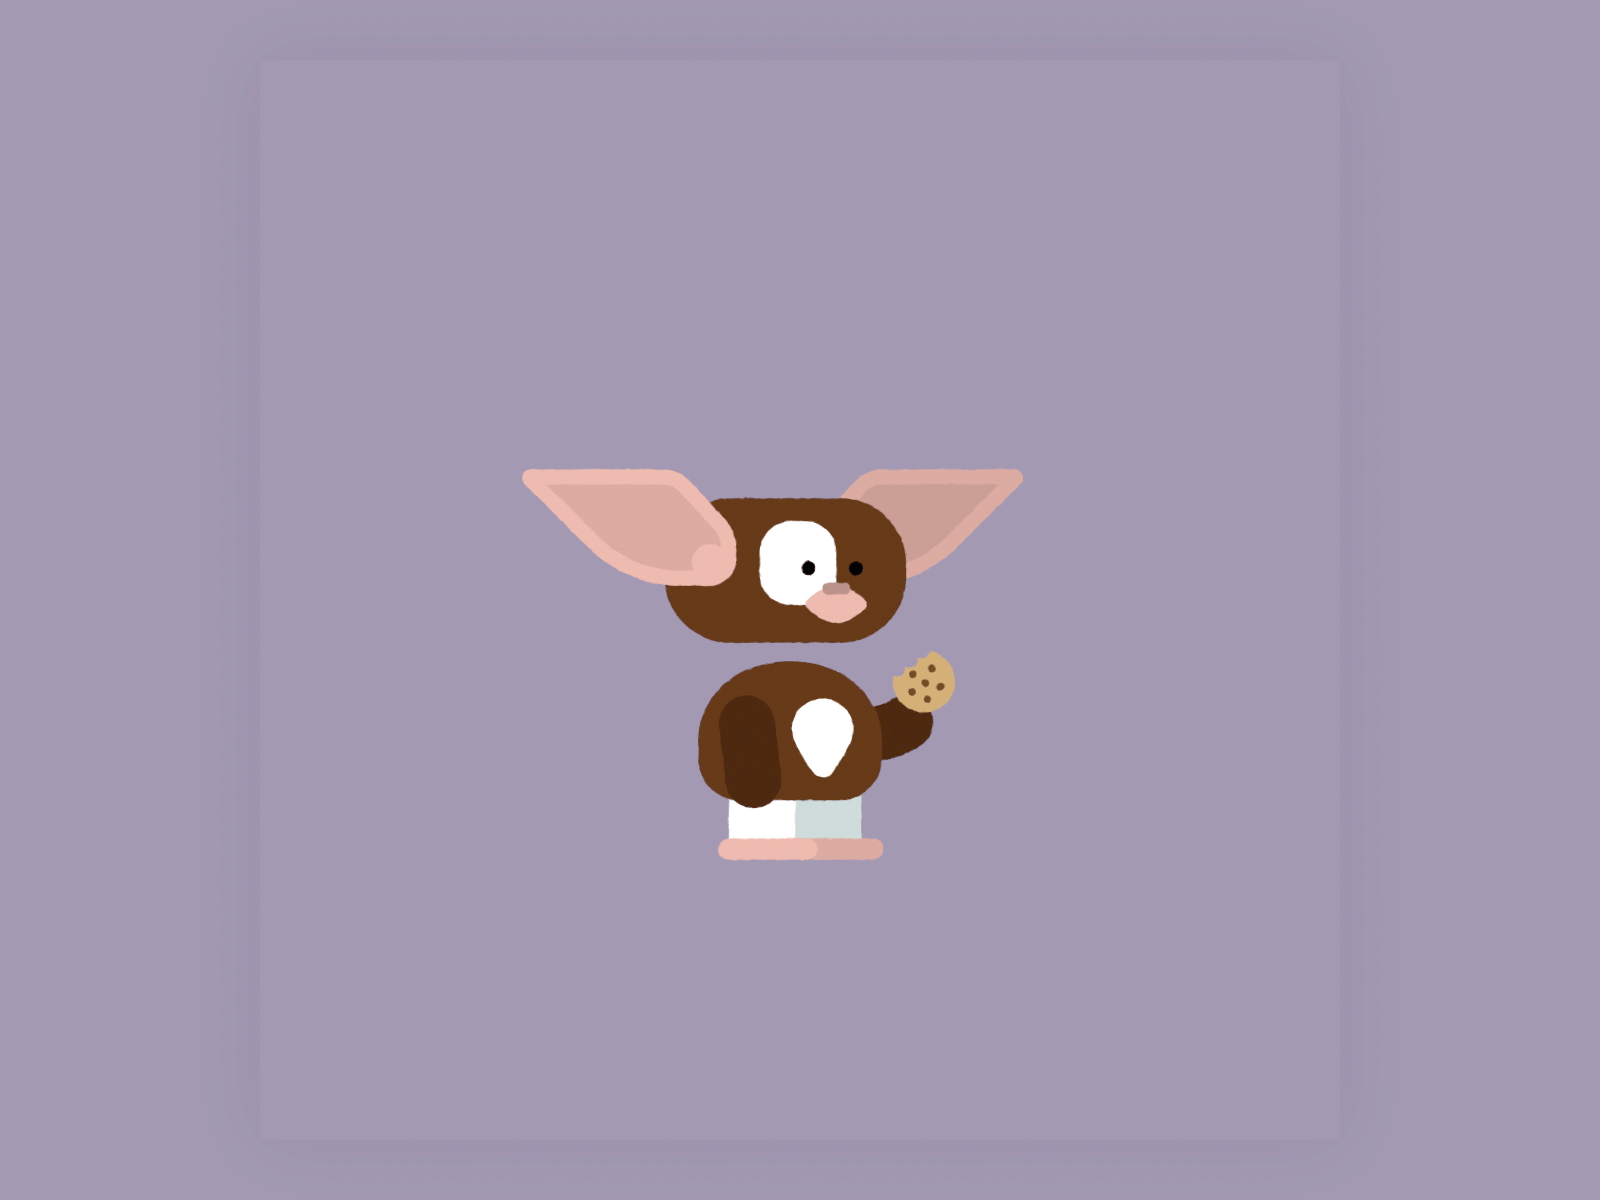 Gremlins Creature From The Movie Monster Hunter Background Gizmo Gremlins  Pictures Background Image And Wallpaper for Free Download